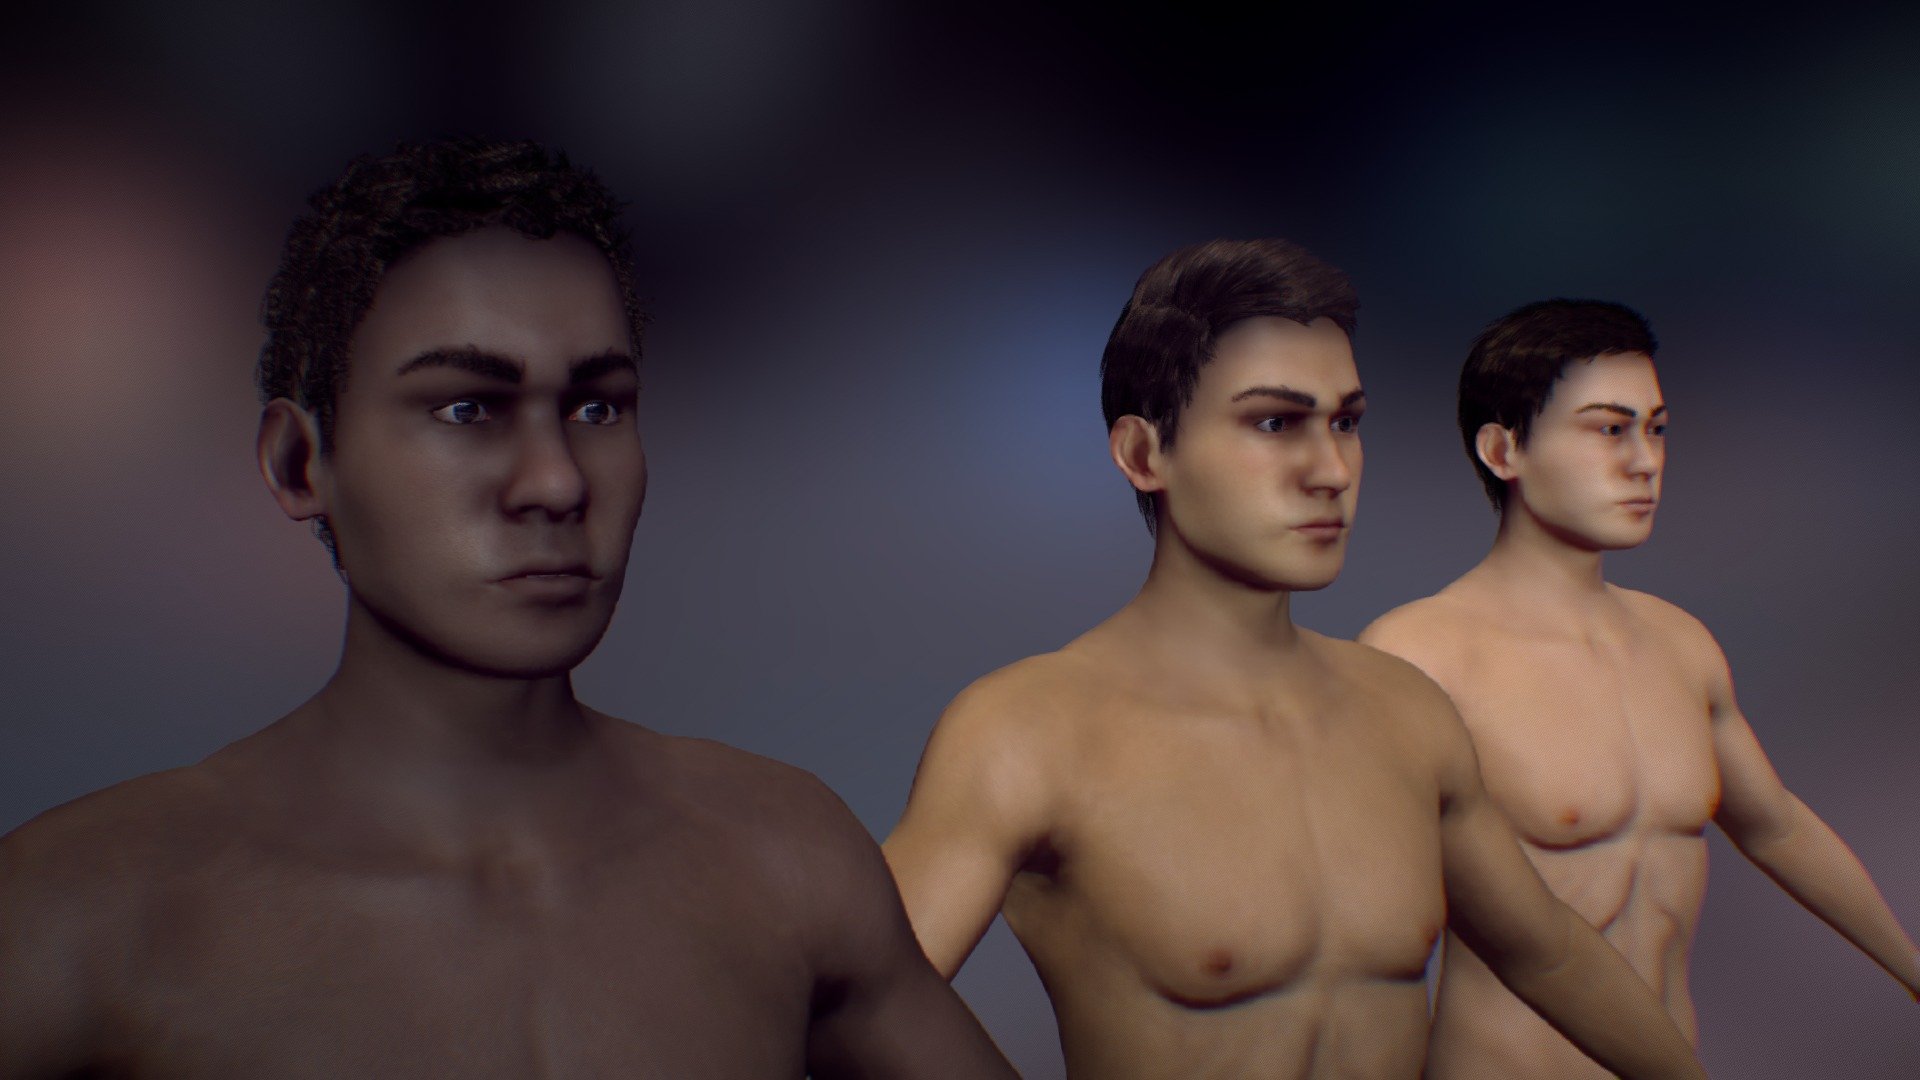 A collection made based on three ethnicities: Caucasian, African and Asian. Each ethnic group has its male and female, dressed and naked version.

In this version you get the African, Caucasian and Asian Male model with clothes and naked.
This model has 24 animations.

Rigged and animated

Formats:

.dae .blend .Fbx

Contains:

Naked Body, Clothing (Shirt, Pants and Shoes), Hair

Textures:

Albedo, Normal, Specular, Alpha, Reflection

(Most textures are in 1024x1024) - Men package - Buy Royalty Free 3D model by Gabriel Souza (@gabrielsouza) 3d model